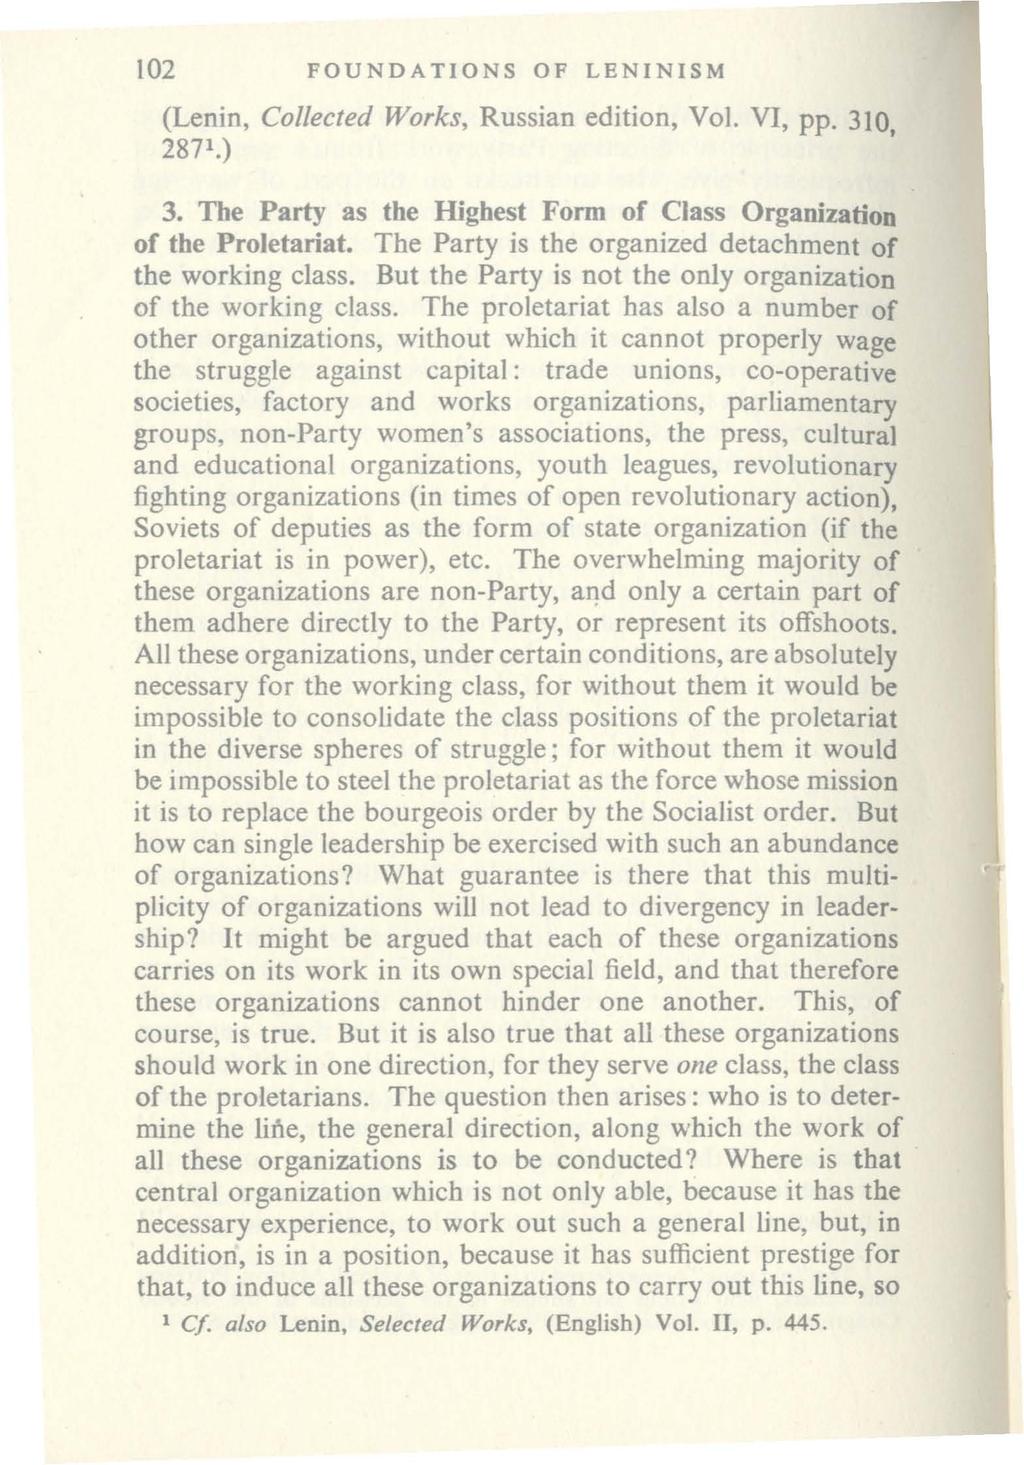 102 FOUNDA TIONS OF LENINISM (Lenin, Collected Works, Russian edition, Vol. VI, pp. 310, 287 1.) 3. The Party as the Highest Form of Class Organization of the Proletariat.